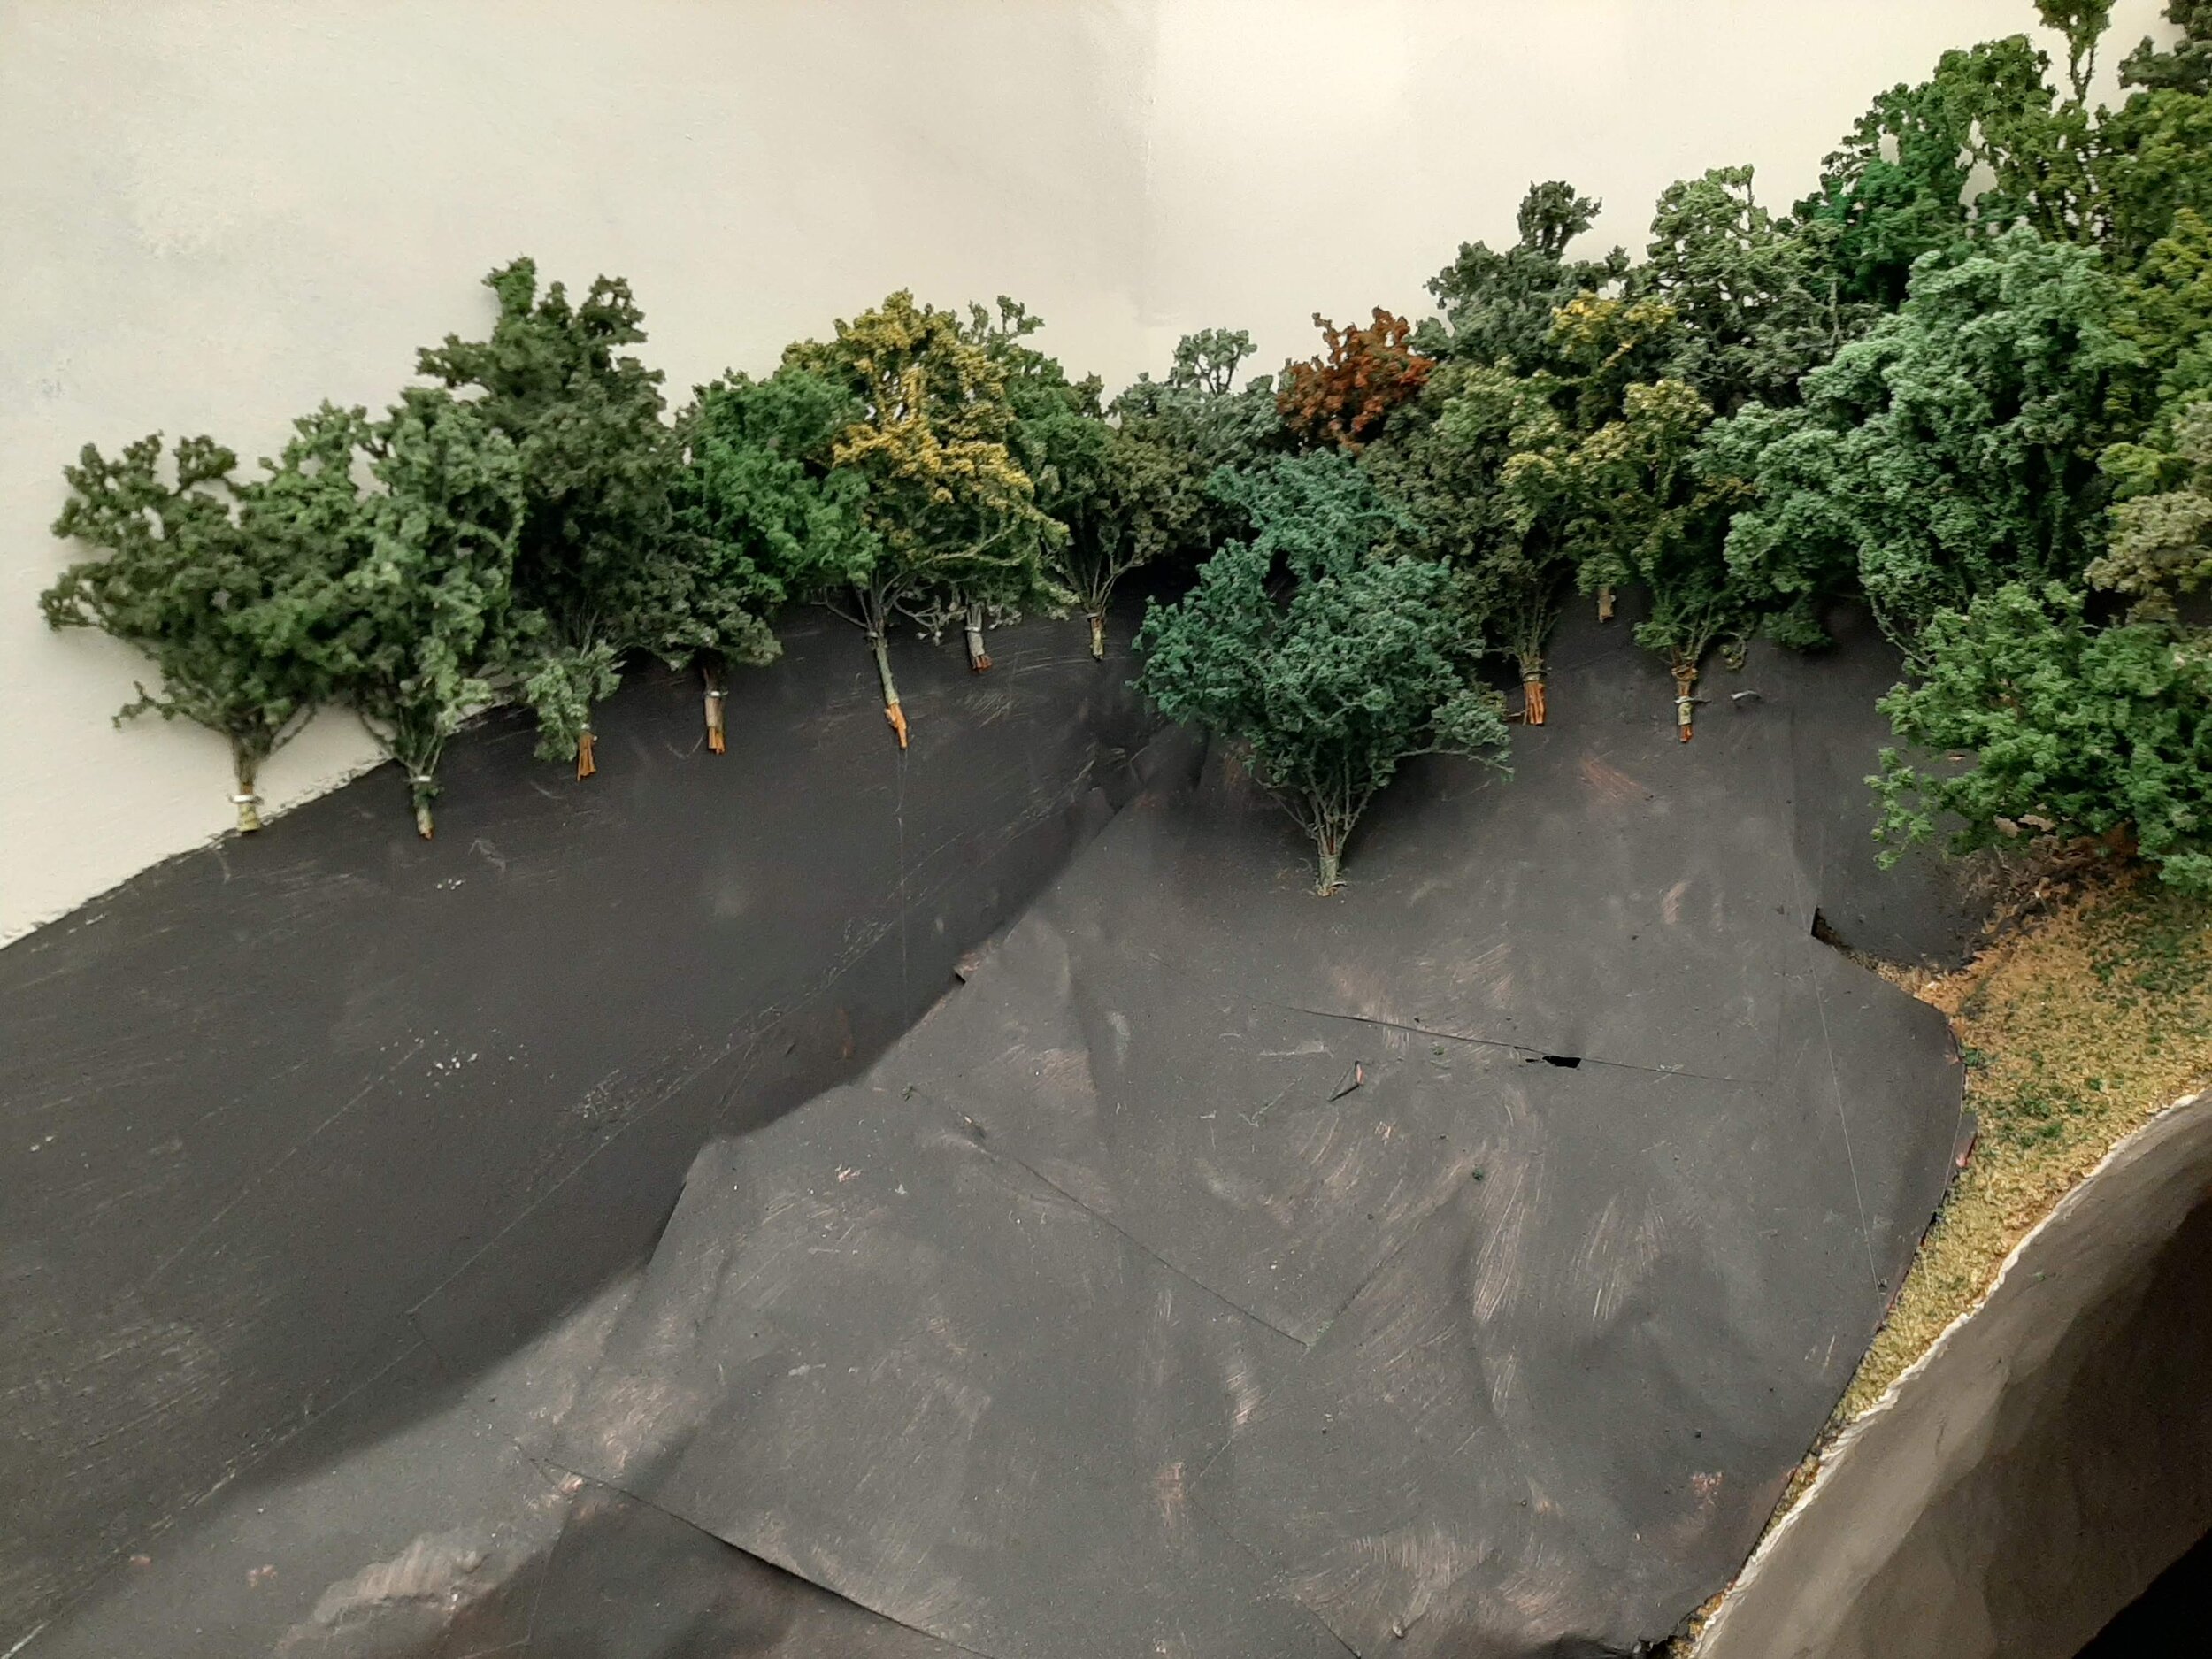  Trees are being “panted” by stapling them to the backdrop/wall. The black paint extends well above the actual landform, thus expanding the scene. And planting smaller trees at the ridge line and increasing in tree size as I progress down the hillsid